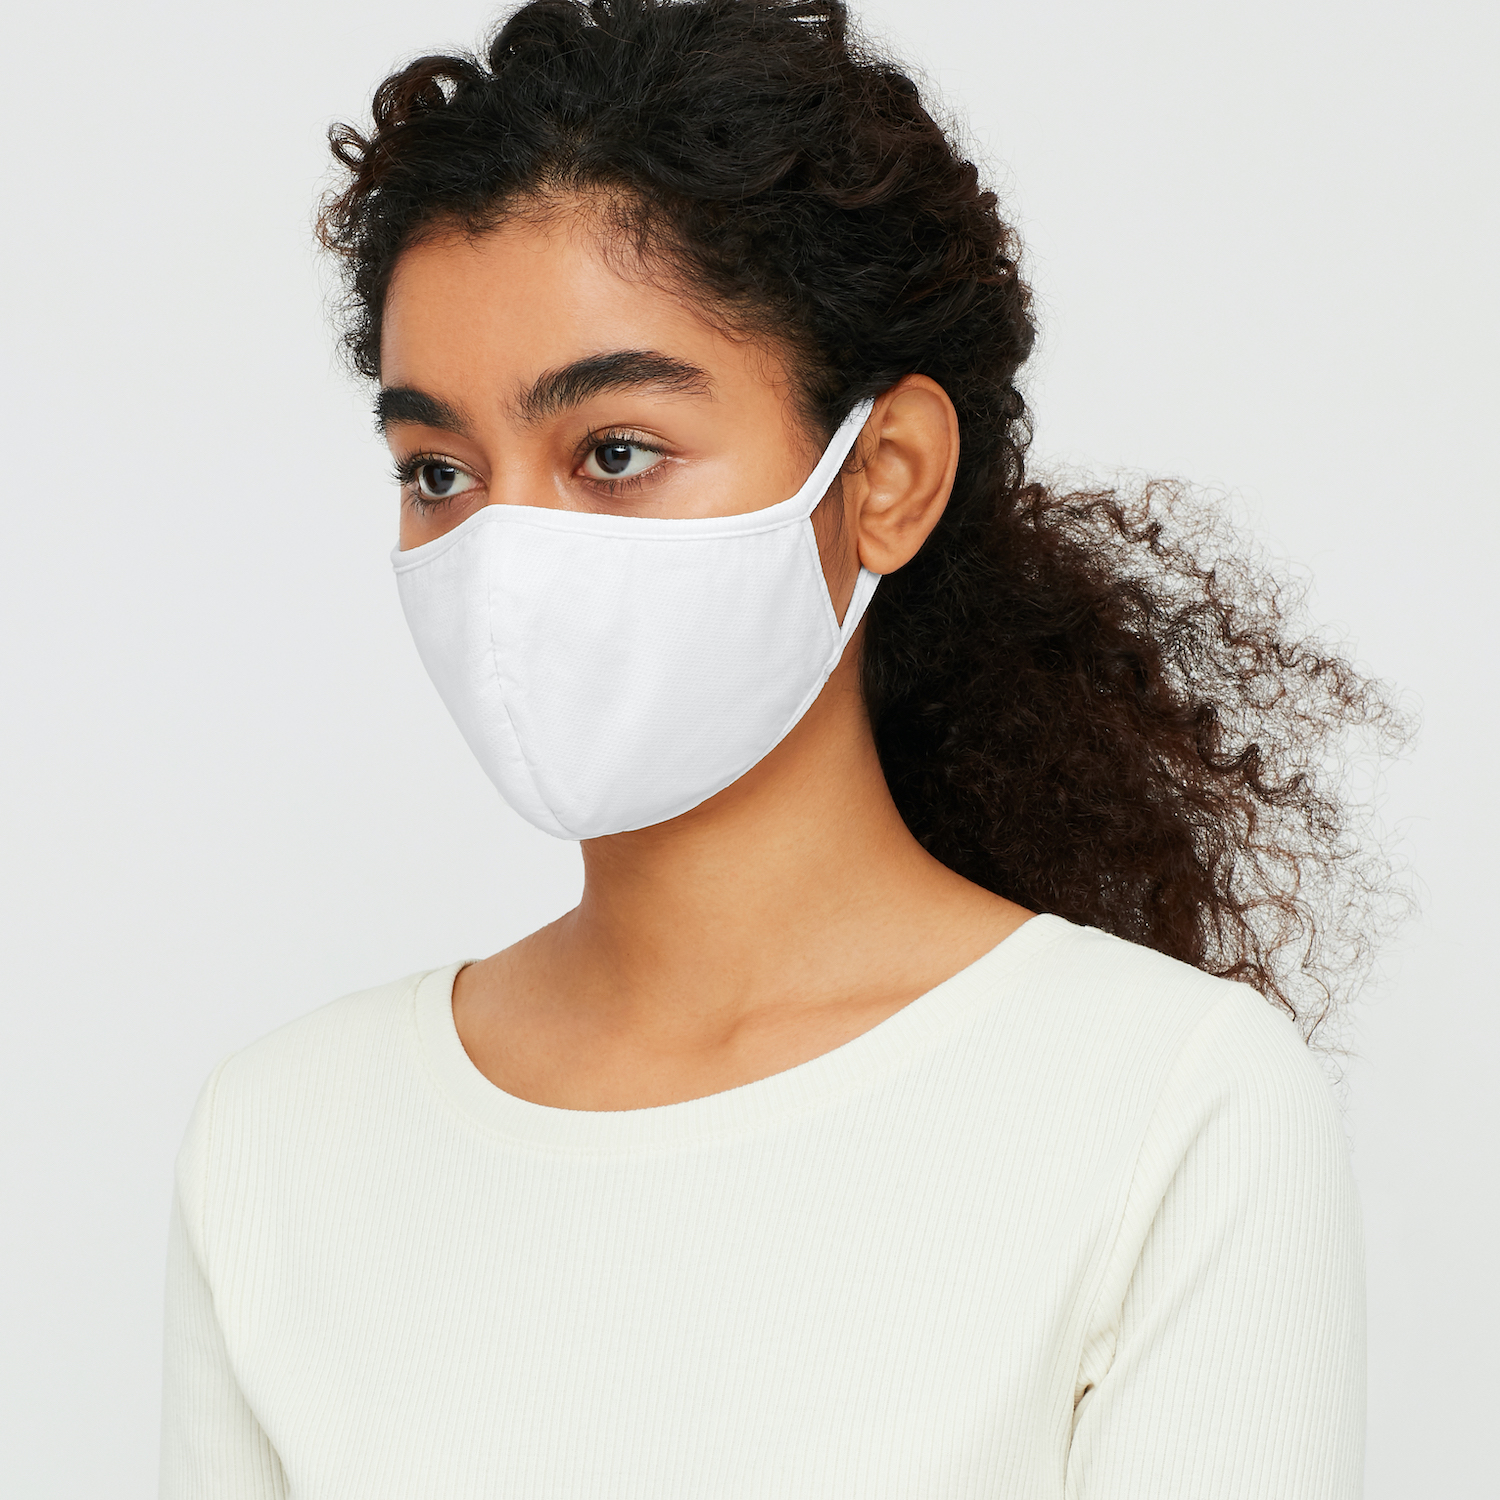 Uniqlo AIRism is now a mask